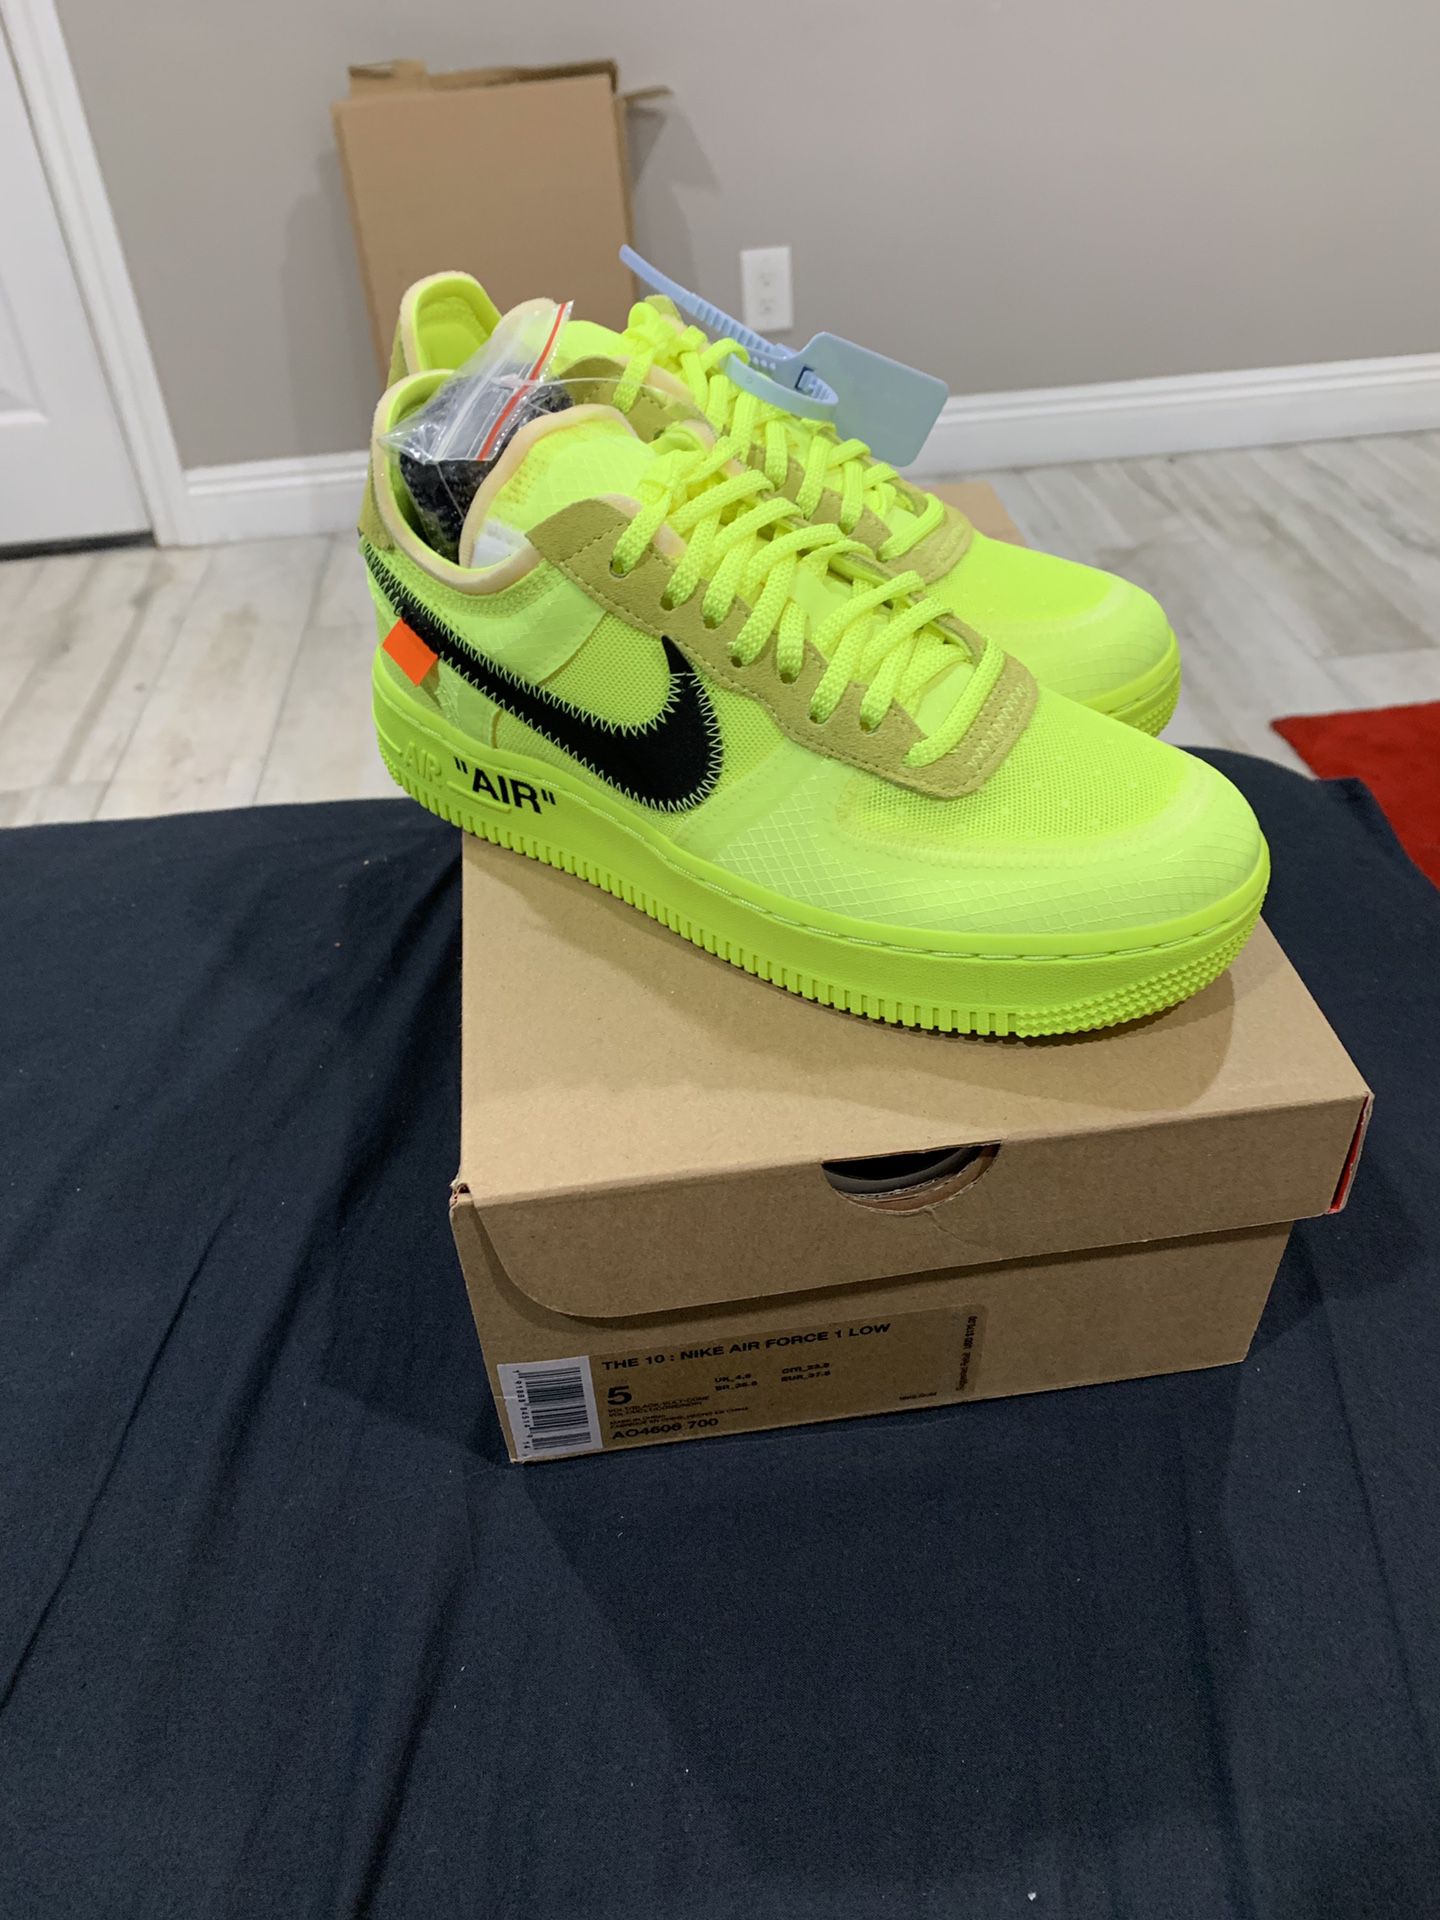 Off White Nike Air Force 1 “MOMA” size 11 for Sale in Los Angeles